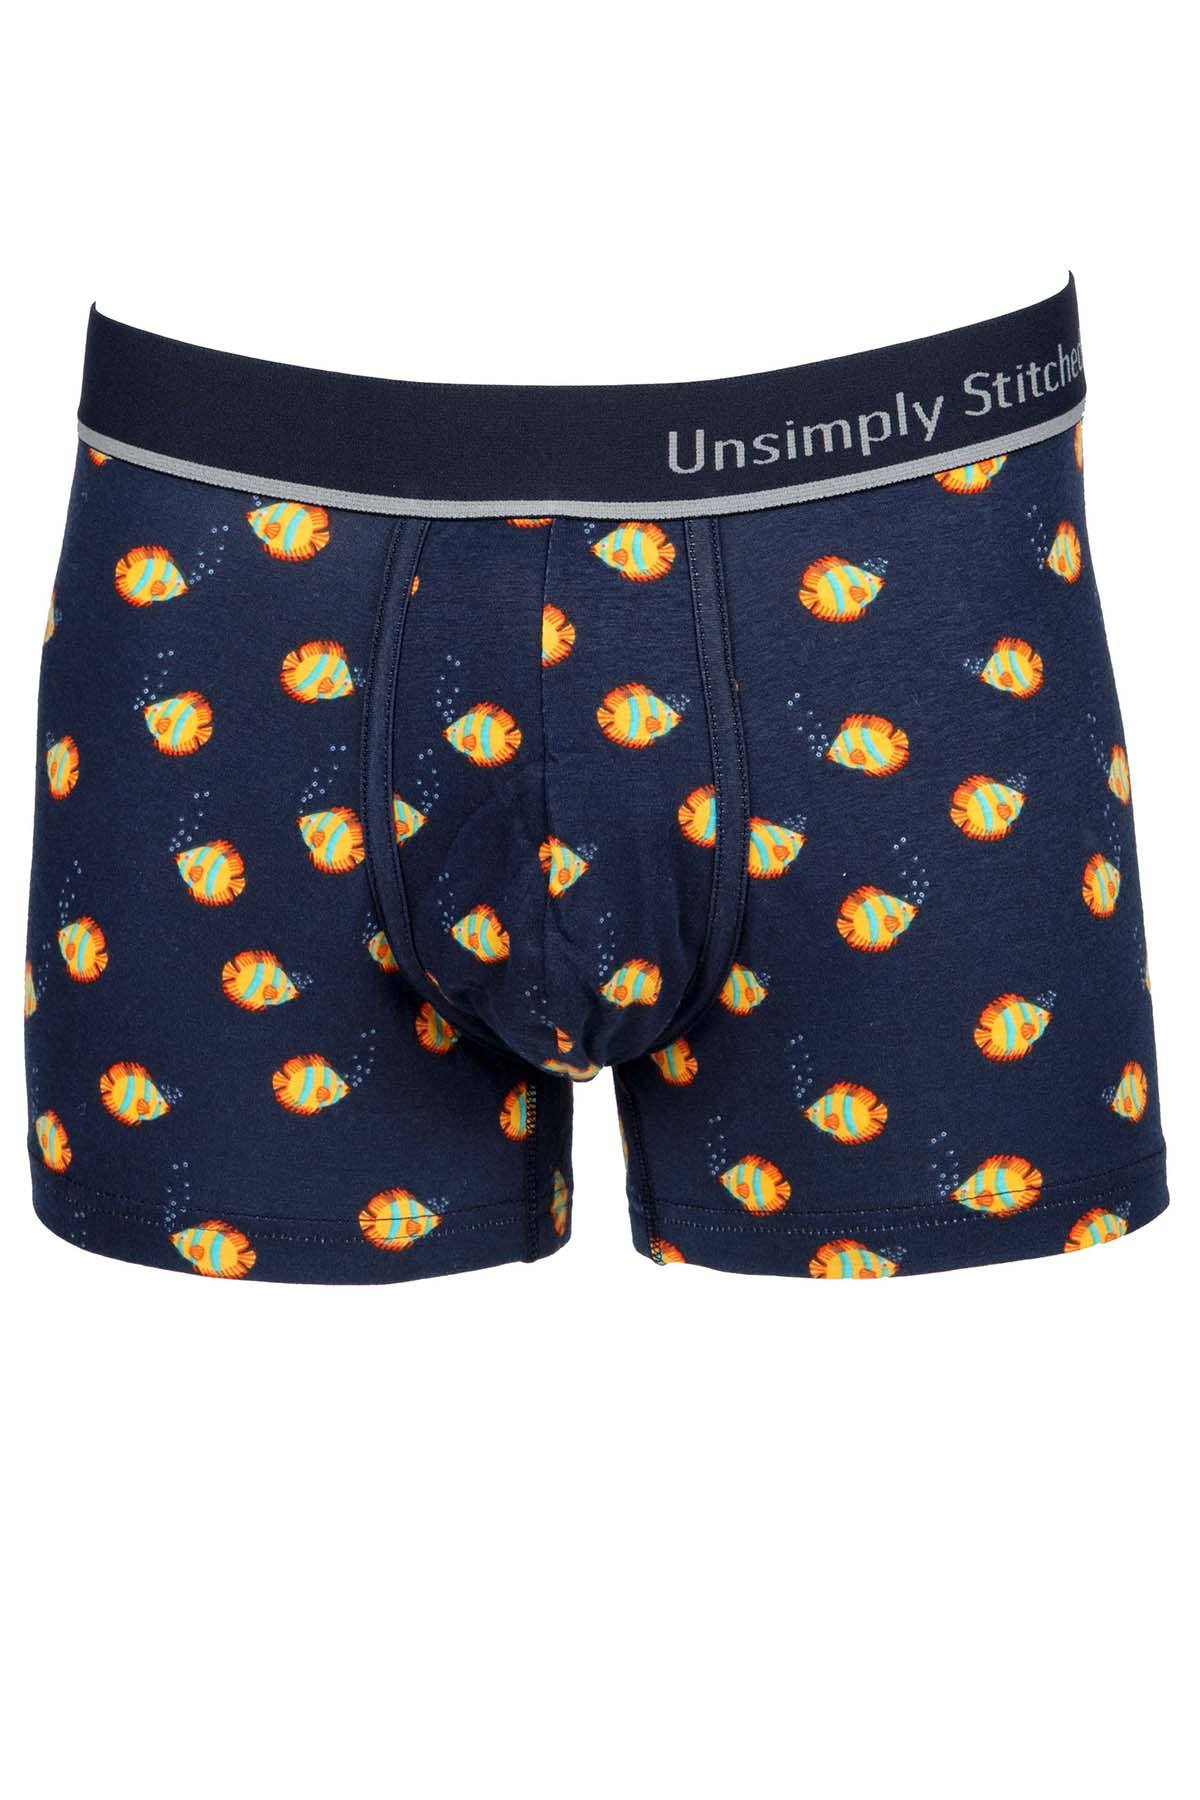 Unsimply Stitched Navy Fish Bubbles Trunk